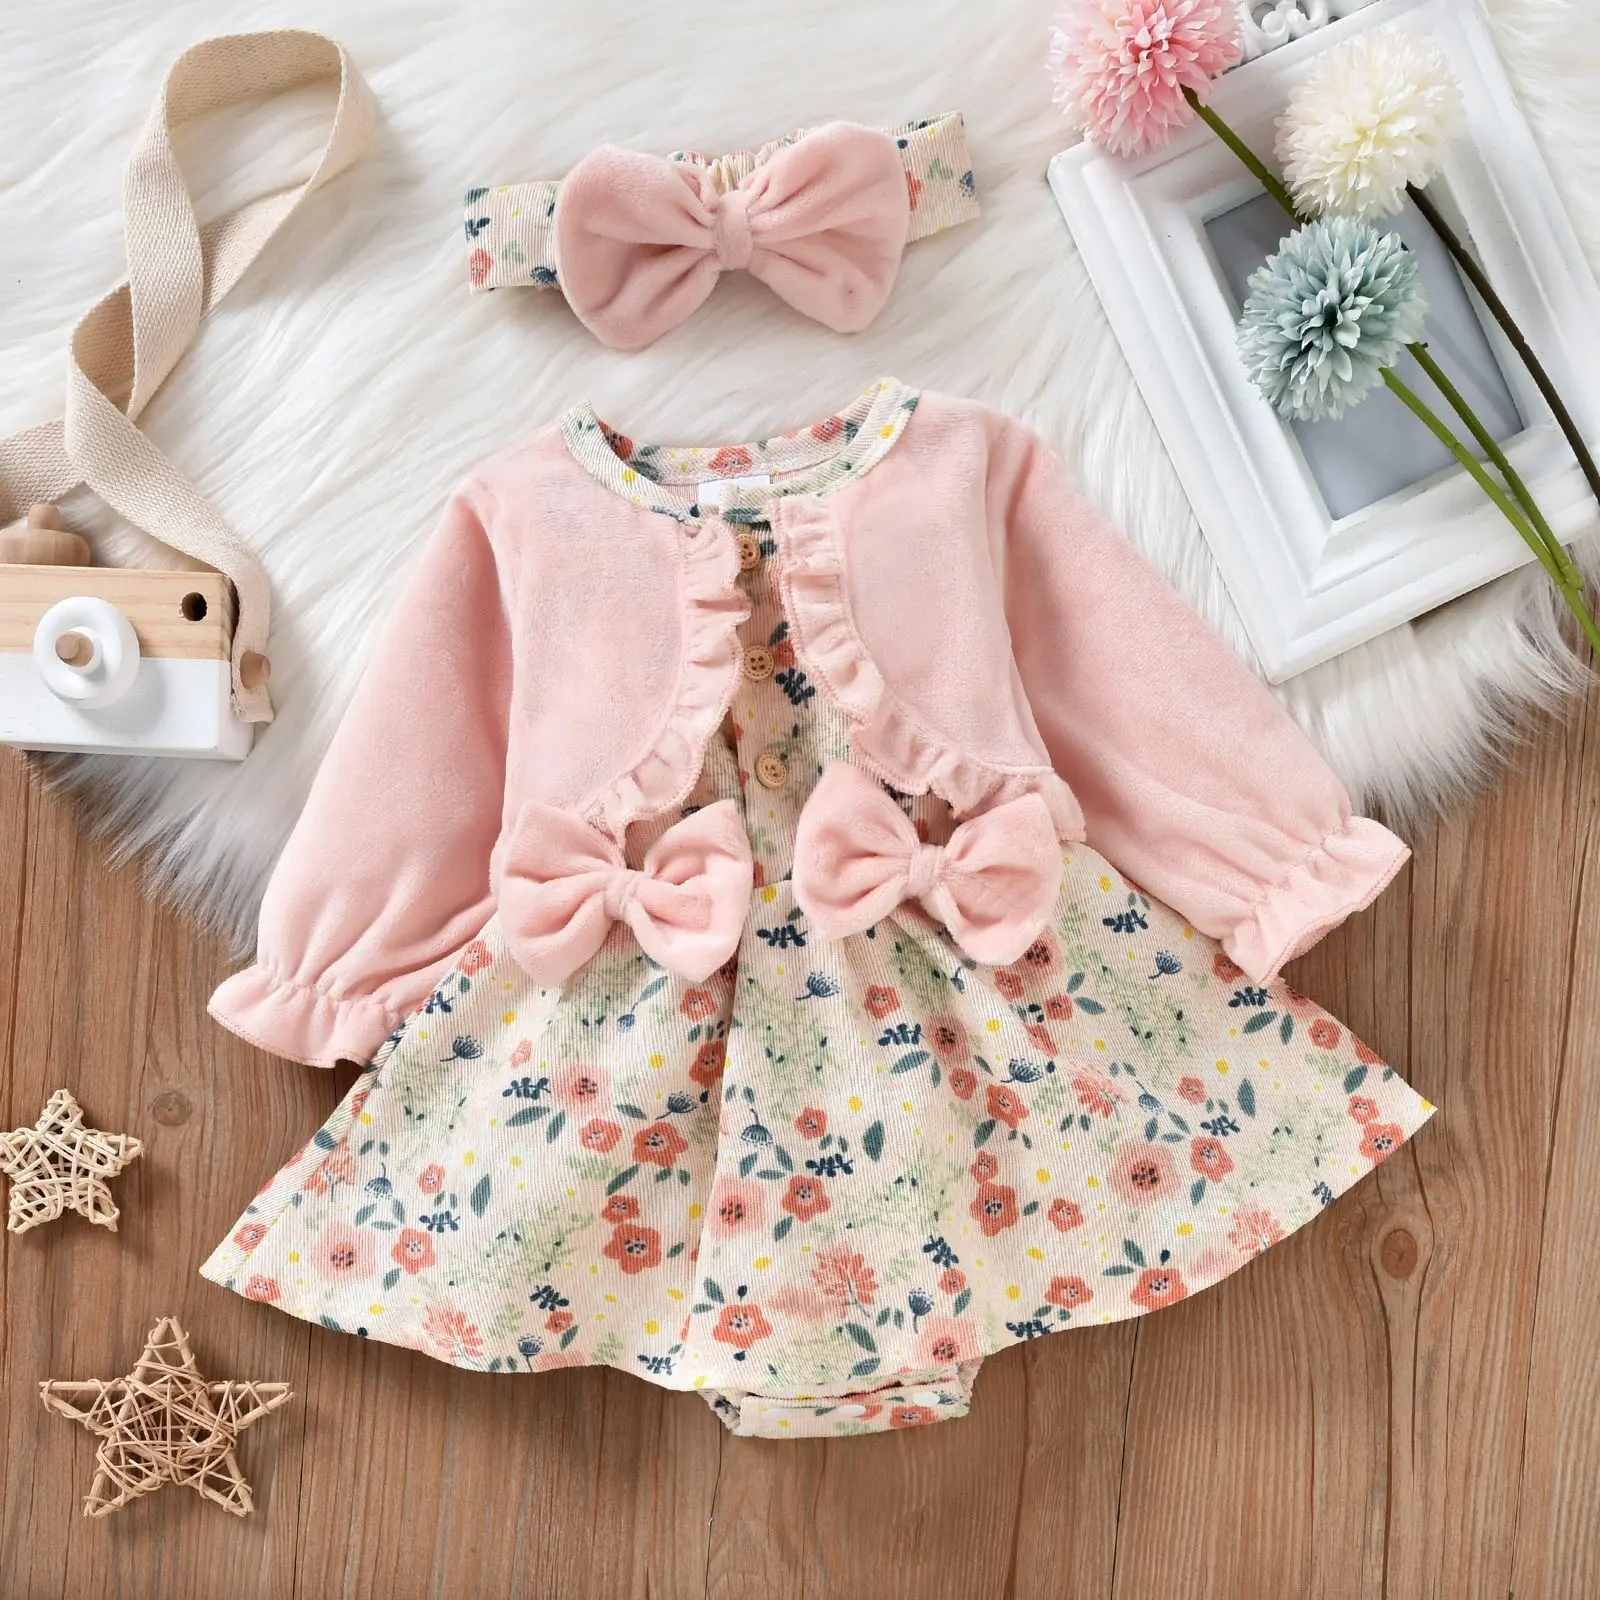 2022 Infant Rompers Princess Bow Long Sleeve Flower Jumpsuit Bodysuit Autumn Spring Costumes Newborn Baby Girl Clothes